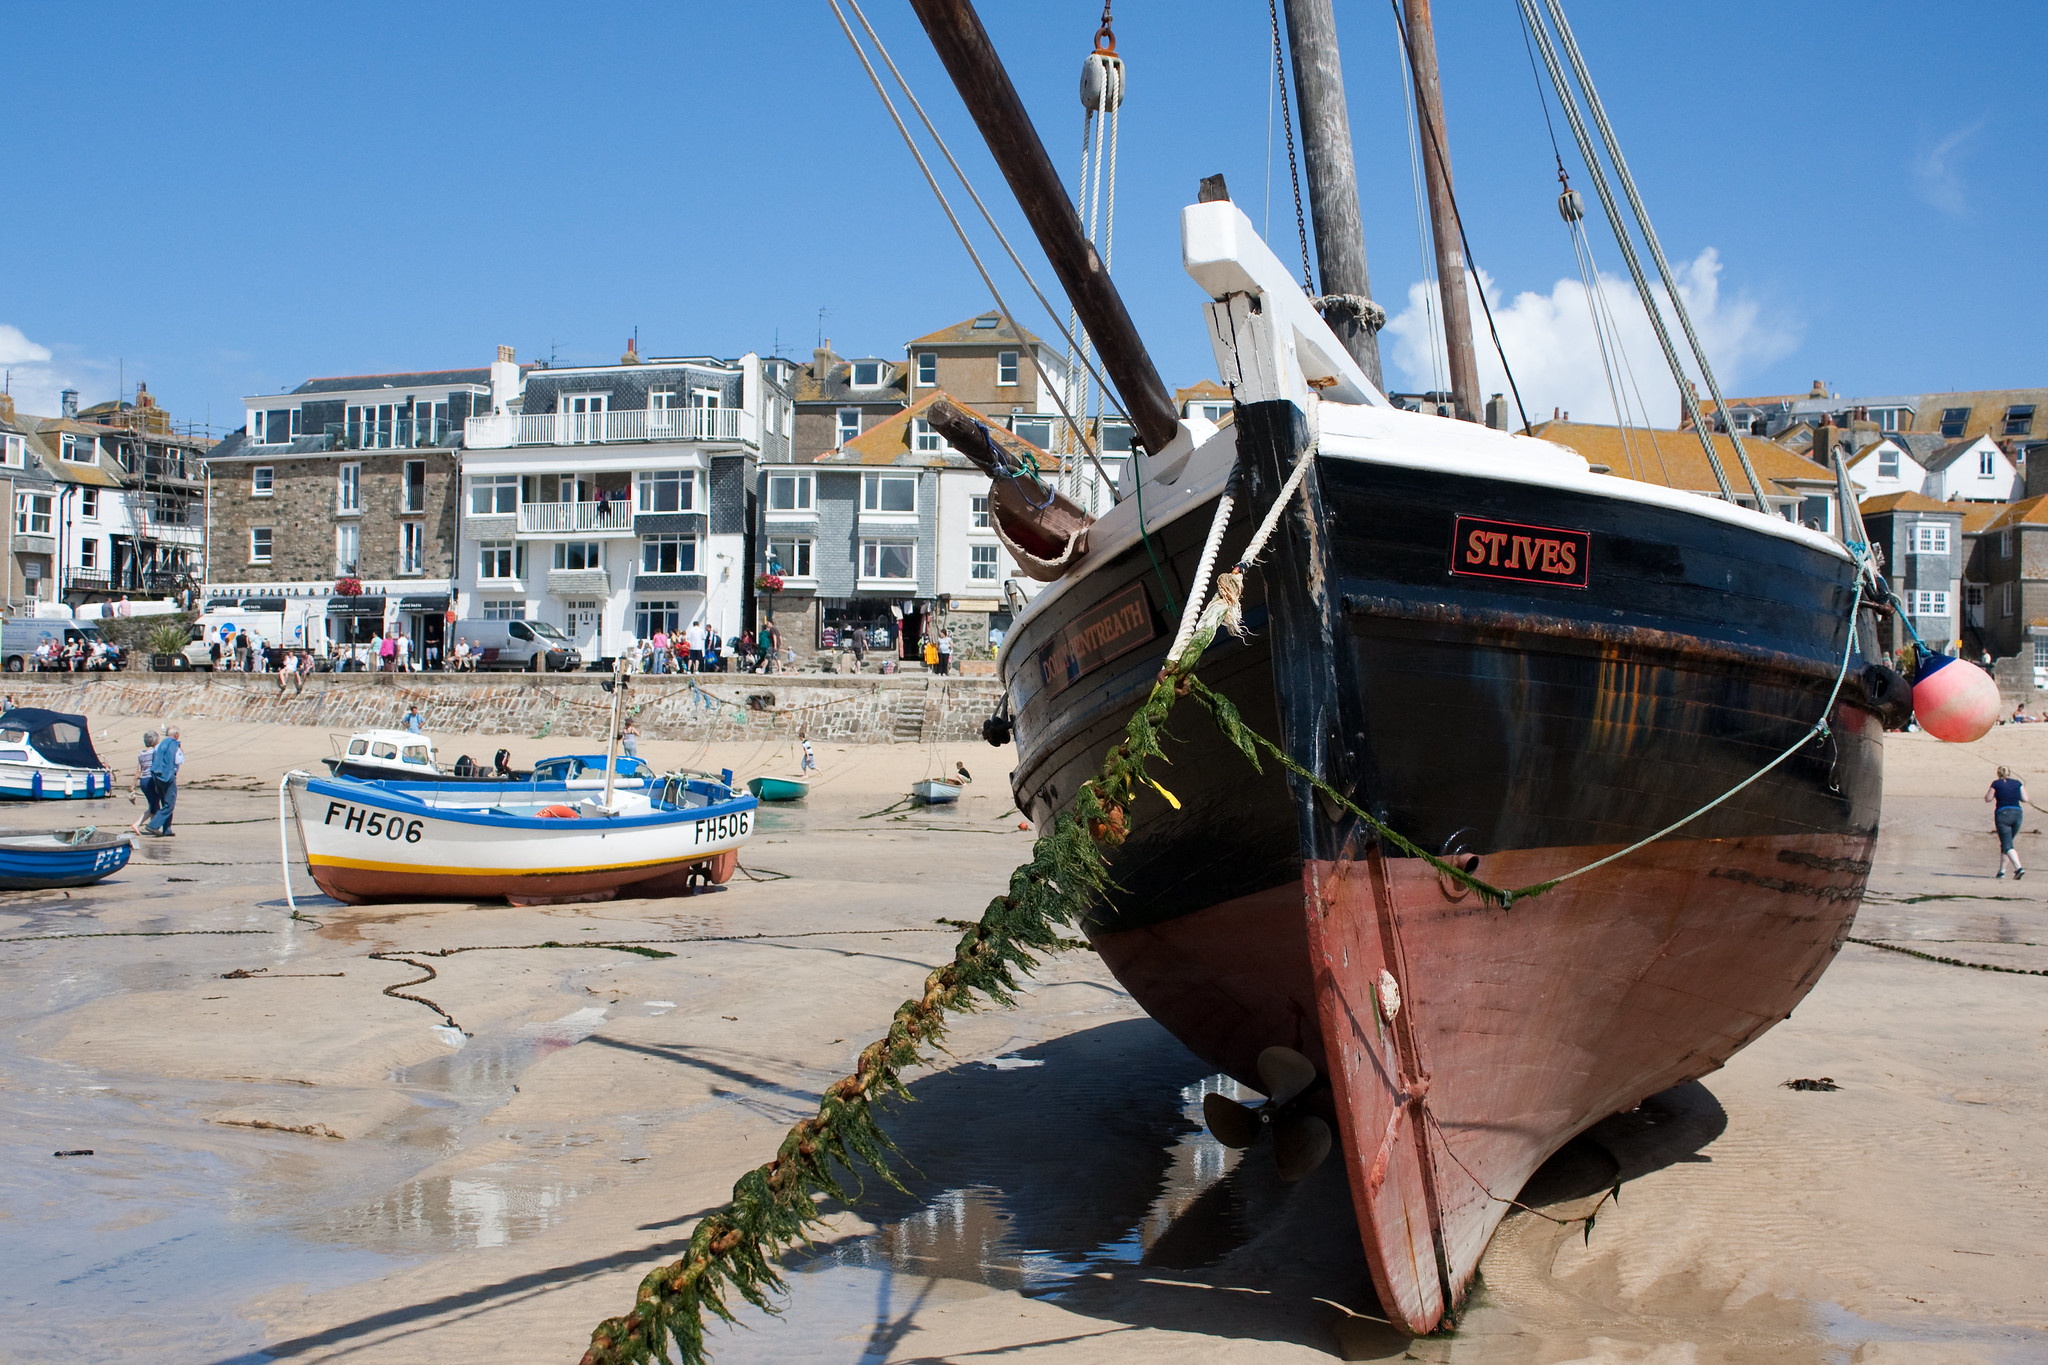 Fishing boat on the sand in St. Ives Harbour